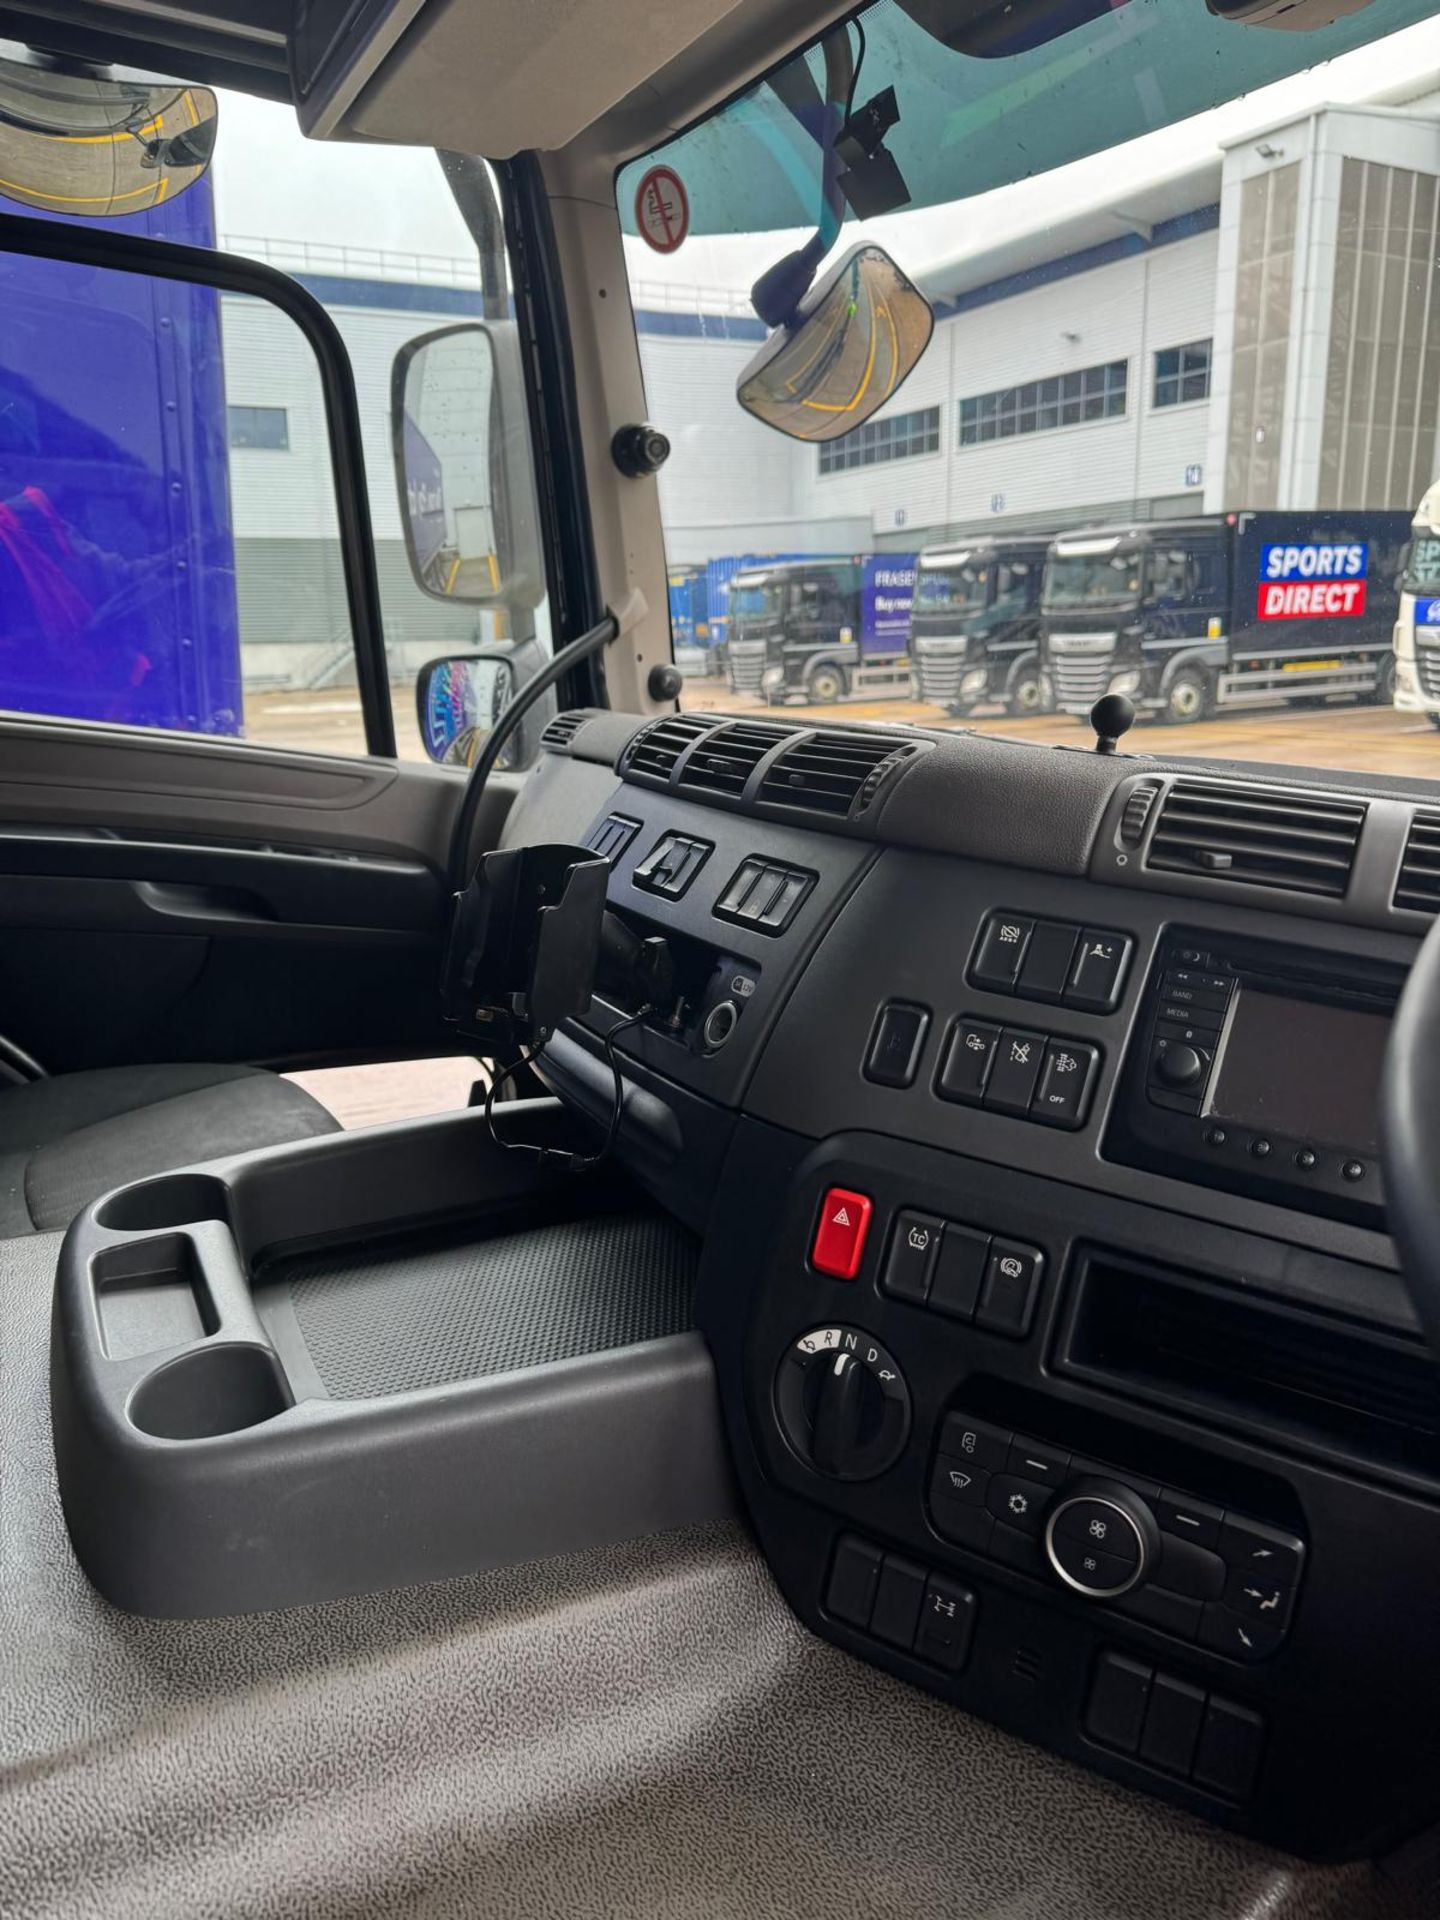 2019, DAF CF 260 FA - FN69 AXH (18 Ton Rigid Truck with Tail Lift) - Image 11 of 22